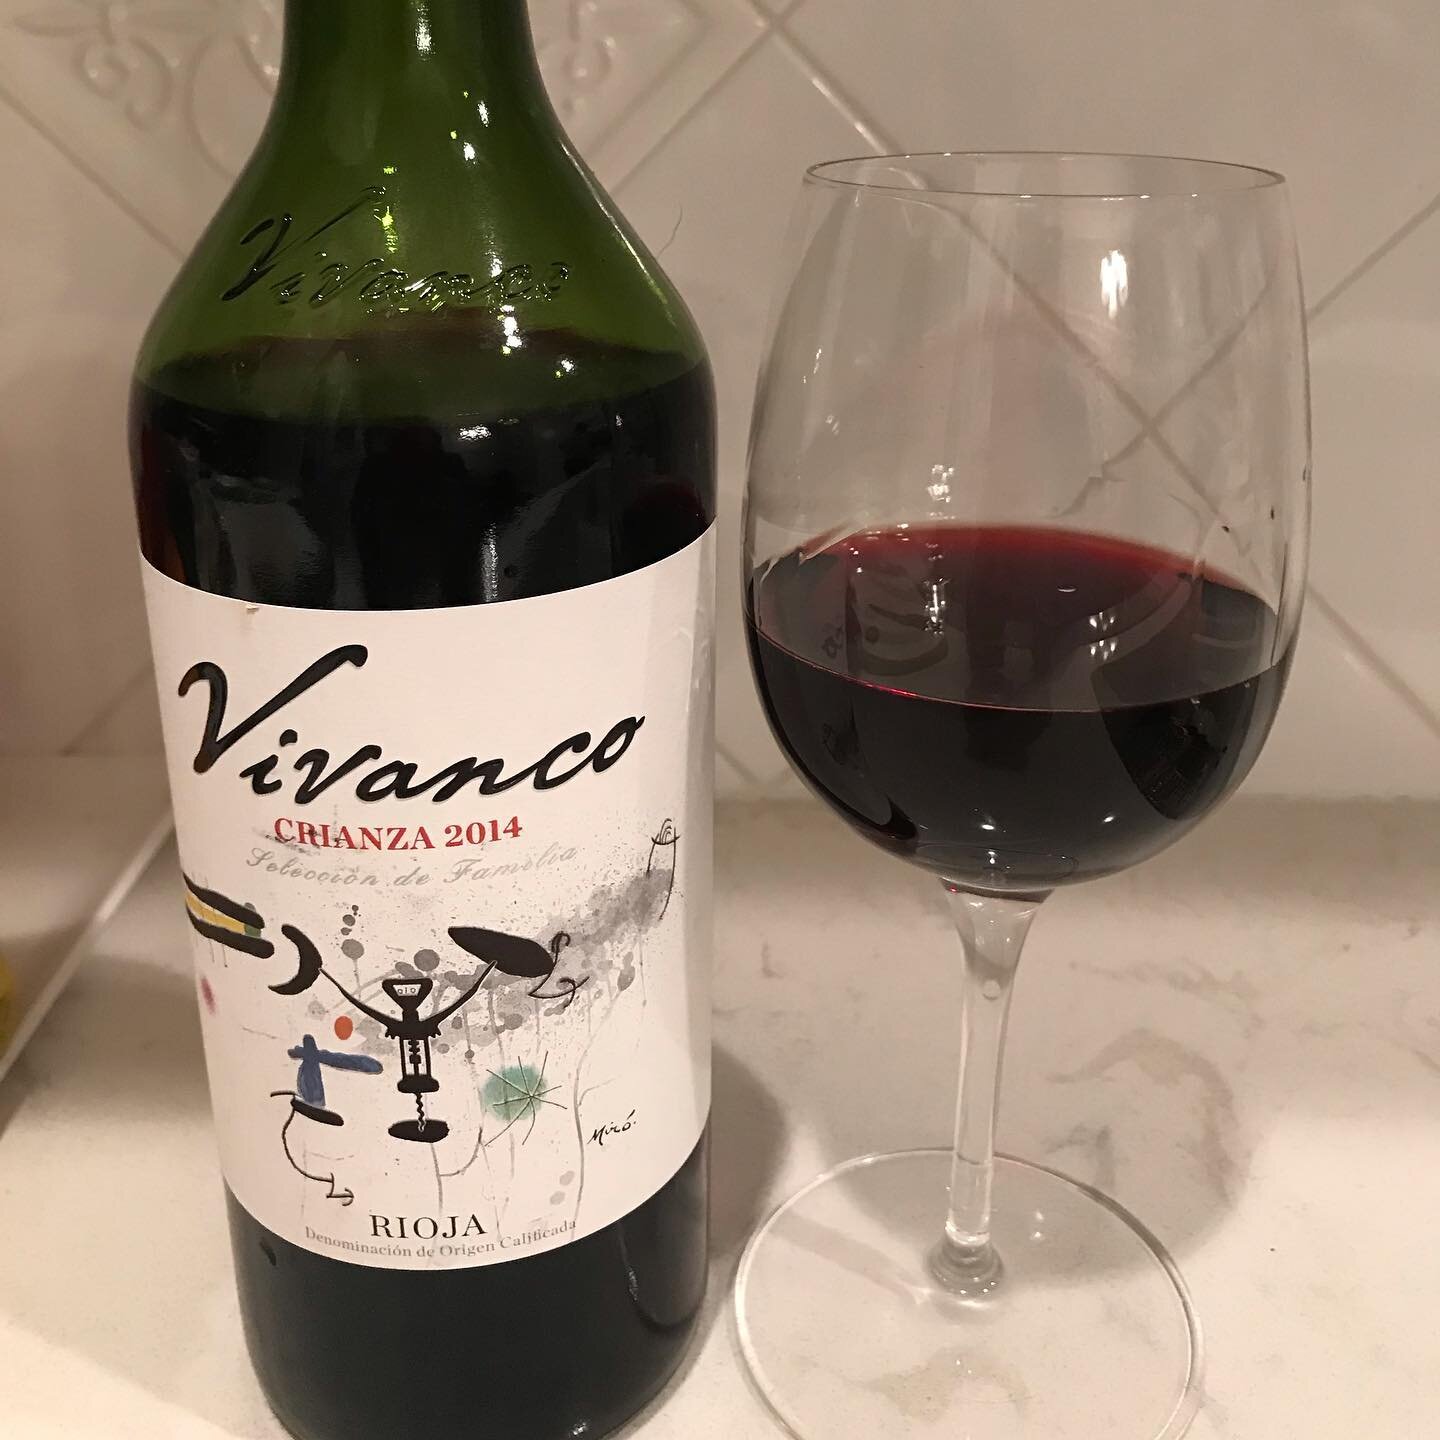 I was excited to recently open this Crianza from my favorite winemaker in Rioja. As expected, the wine lived up to my expectation. It was also refreshing to see the image of Joan Mir&oacute;&rsquo;s La Troubadour (1974) gracing the face of the bottle